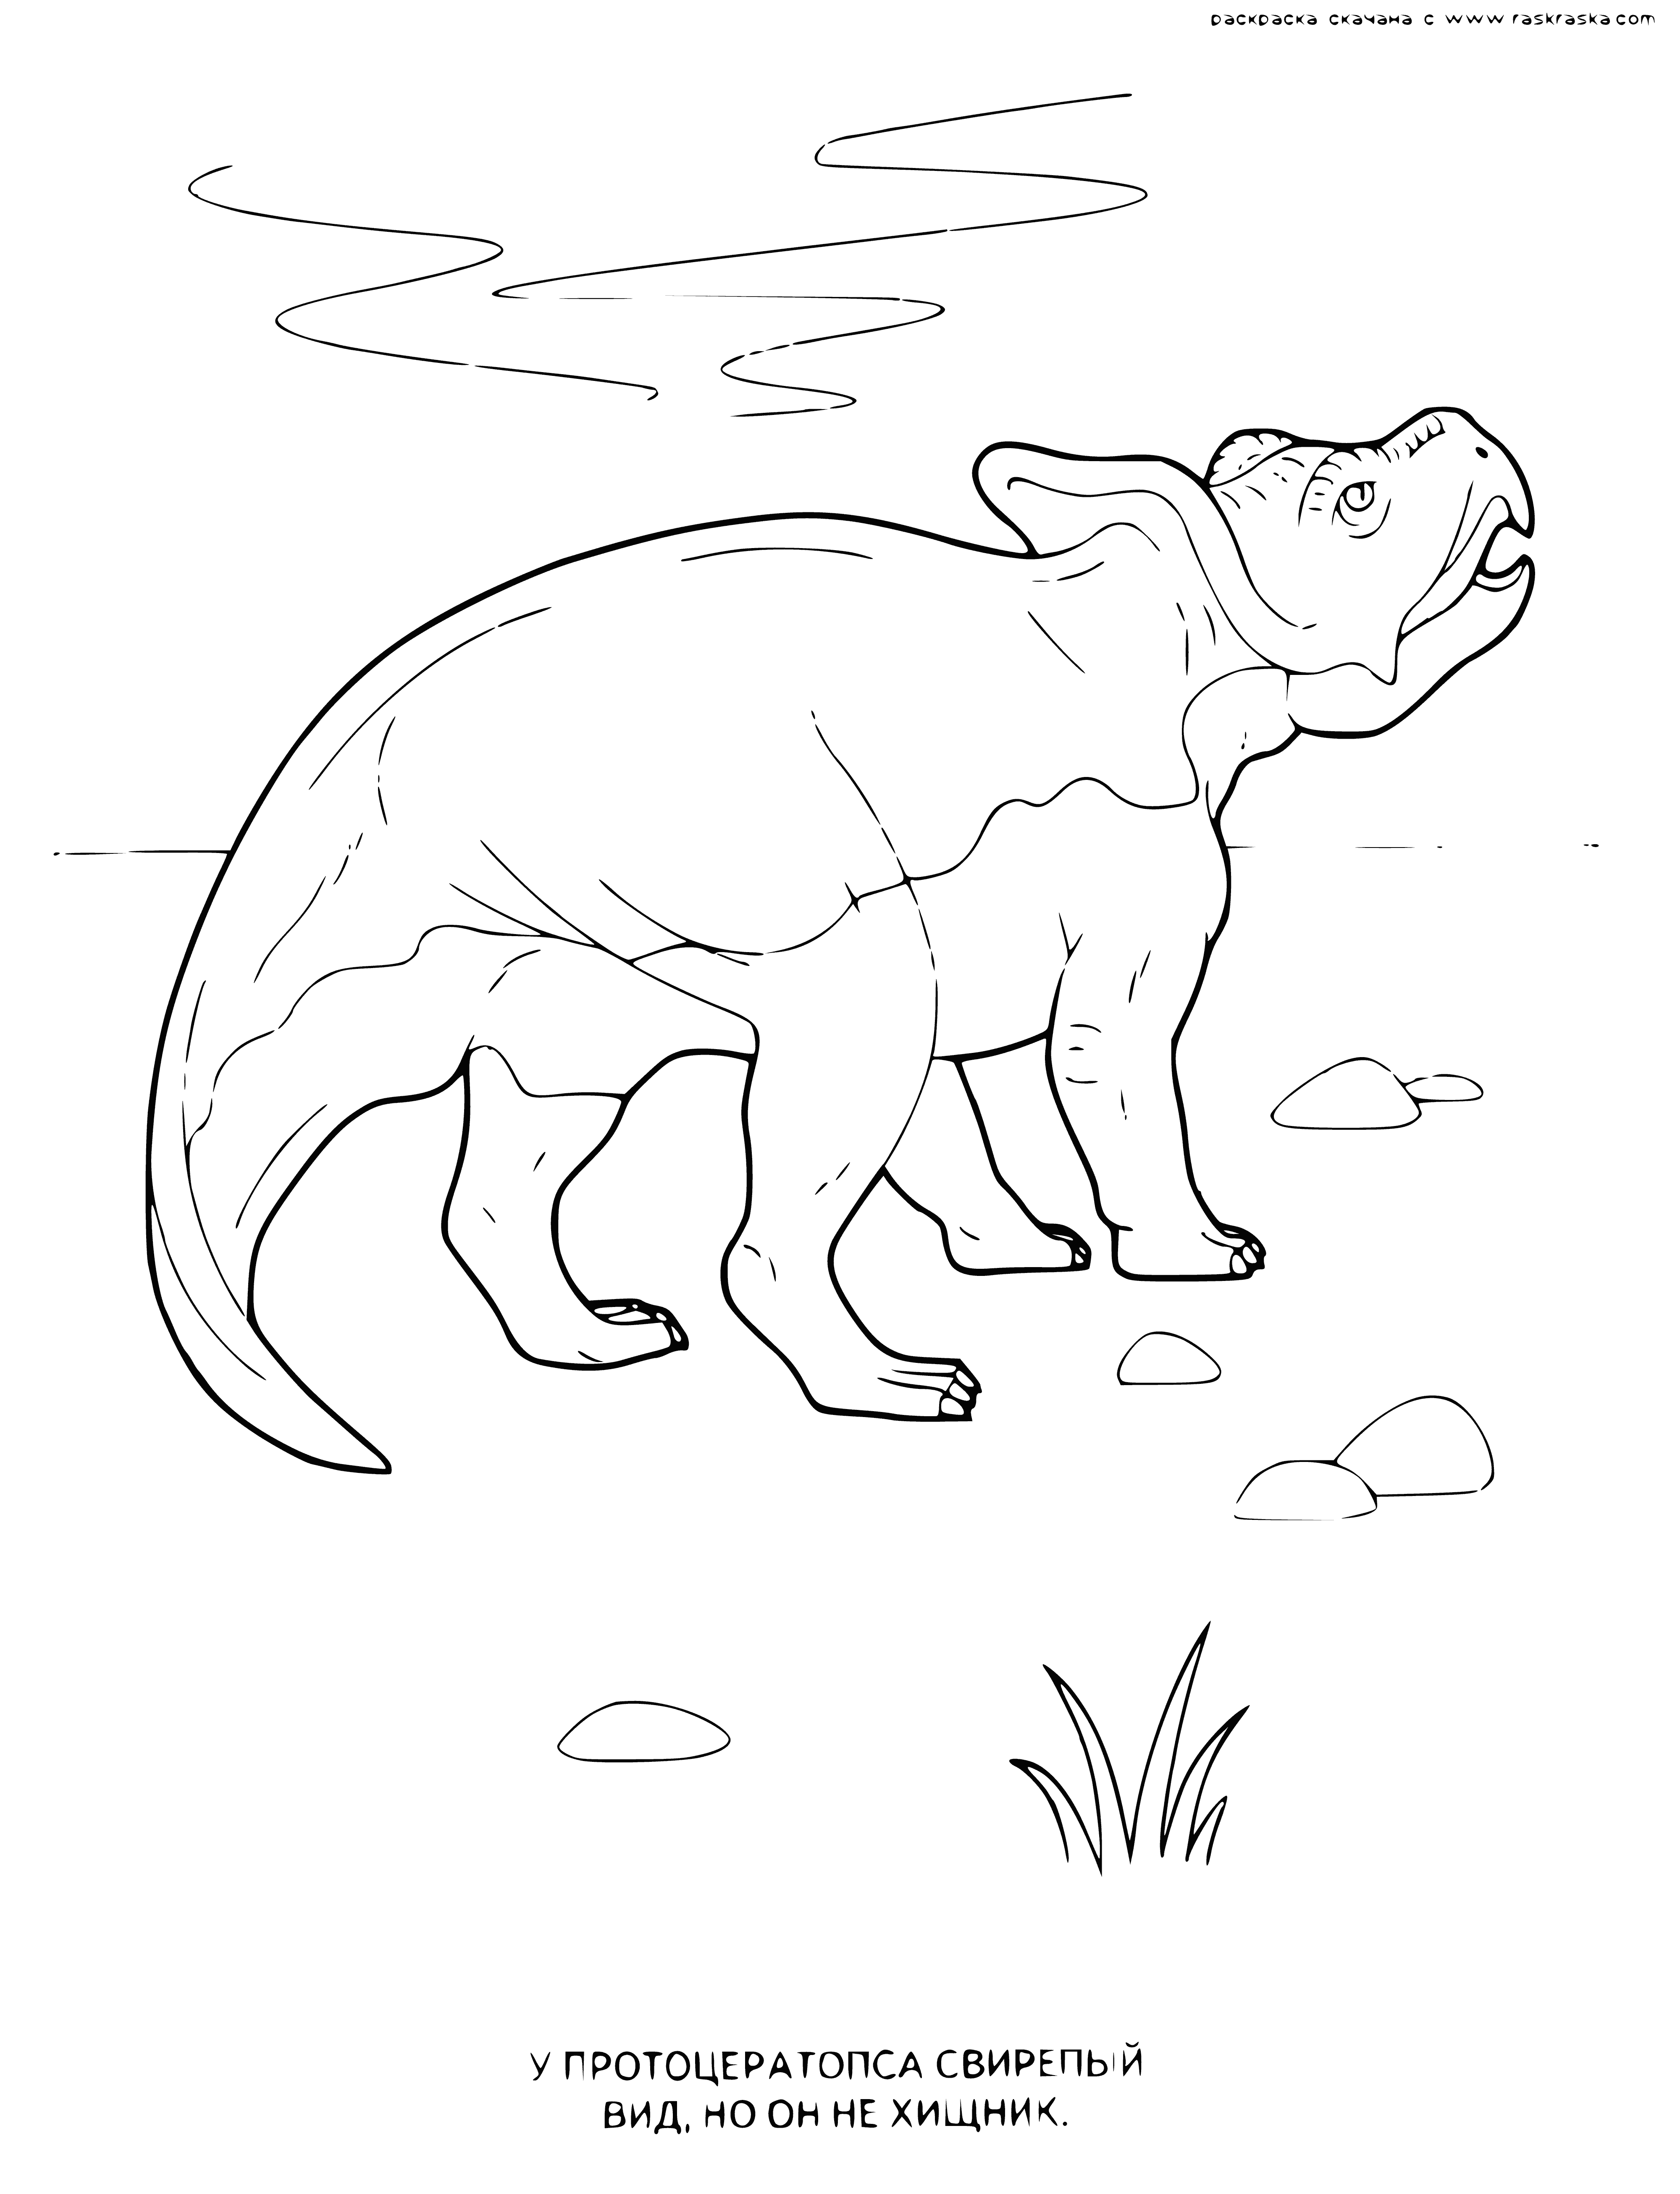 coloring page: Proceratops: 4-legged, beaked herbivore. Lived Late Cretaceous. About size of a sheep.